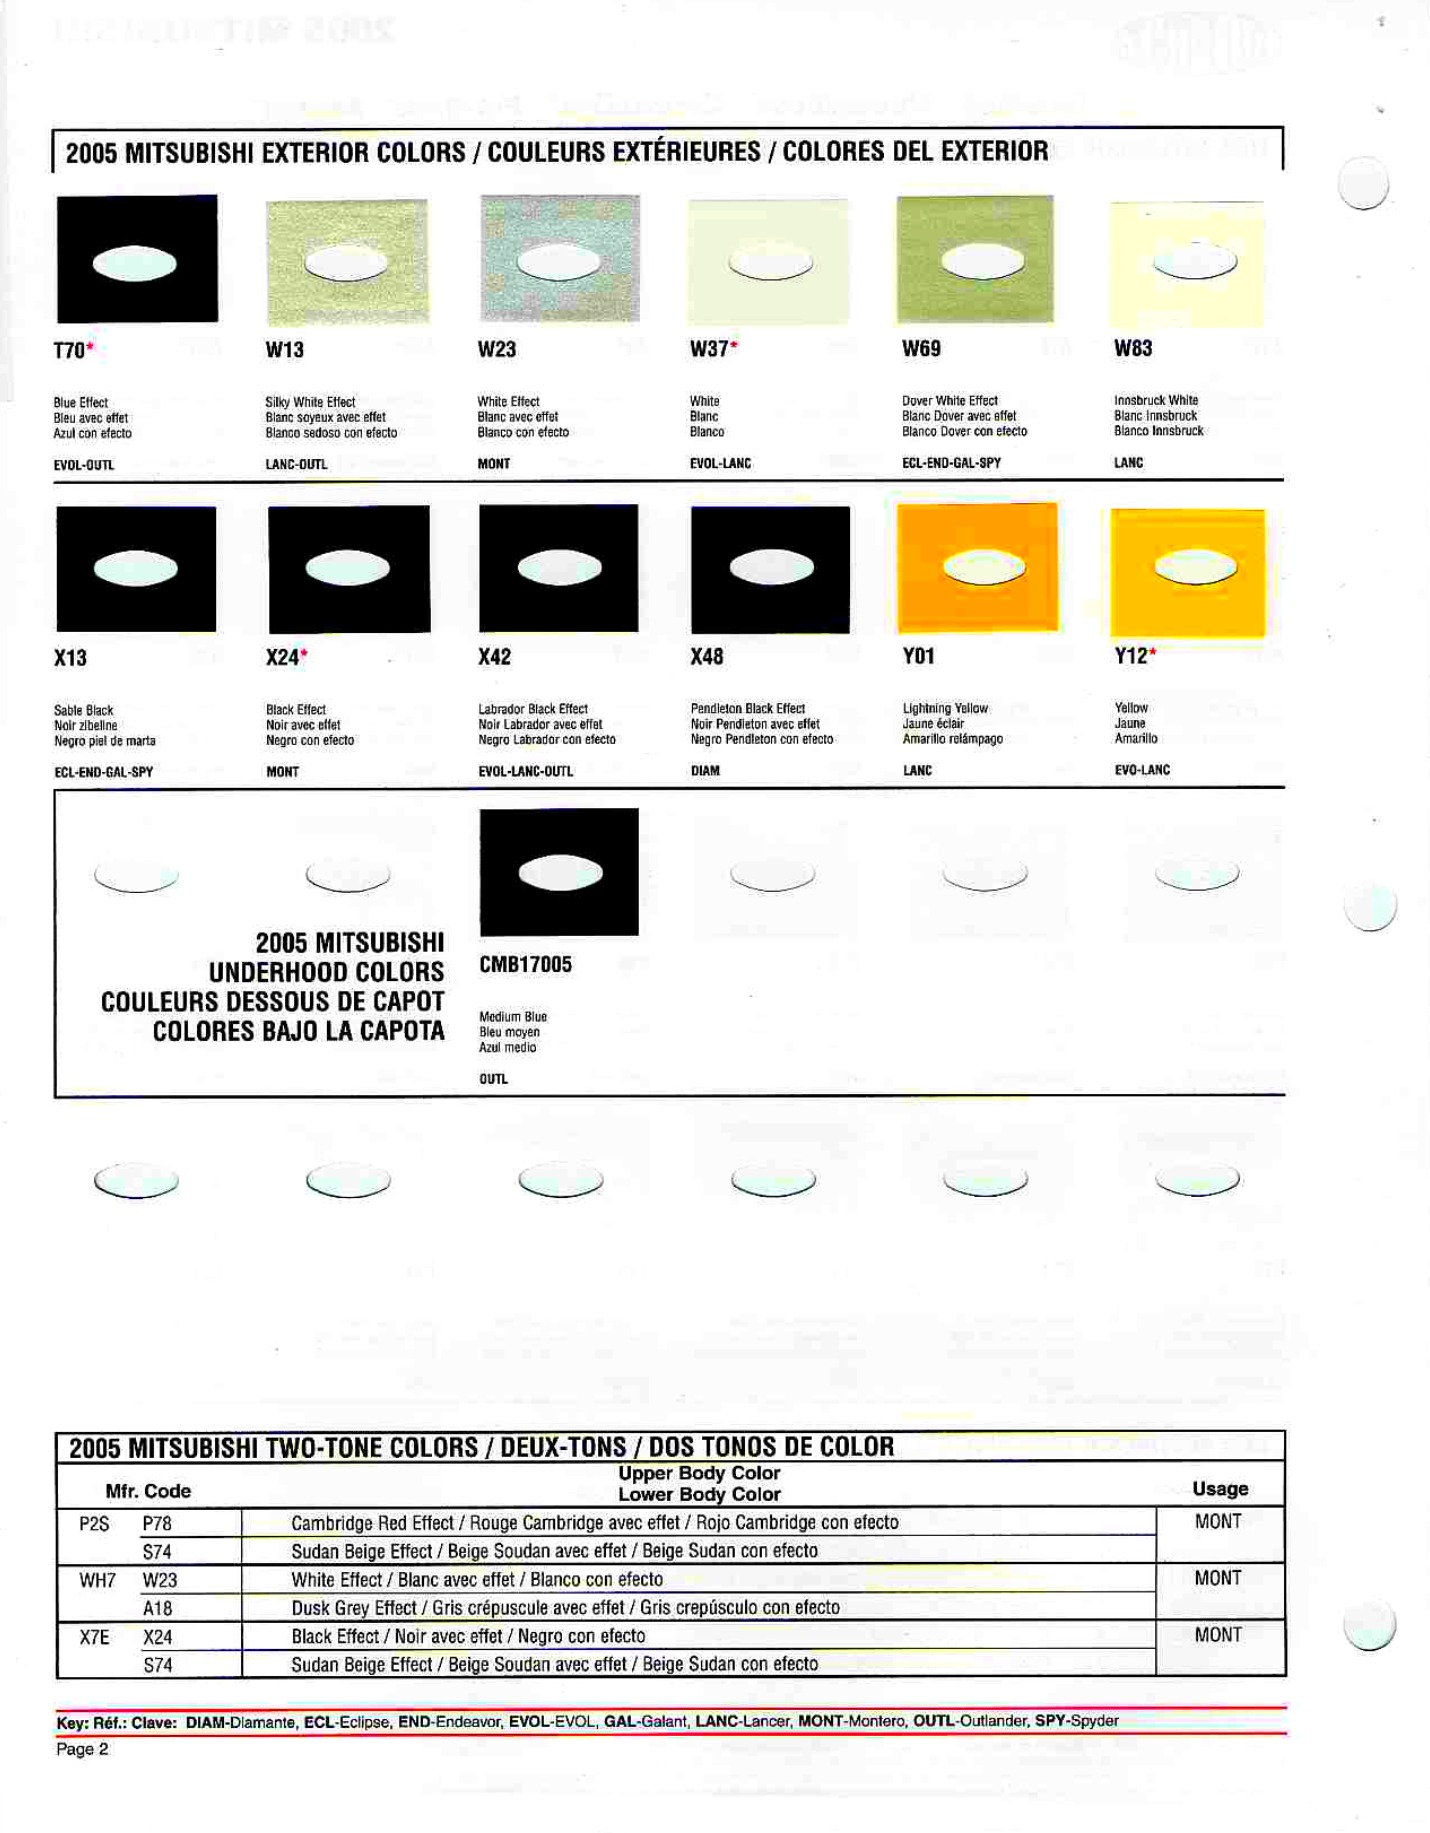 a color chart for 2005 Mitsubishi exterior paint codes color names a paint swatches.